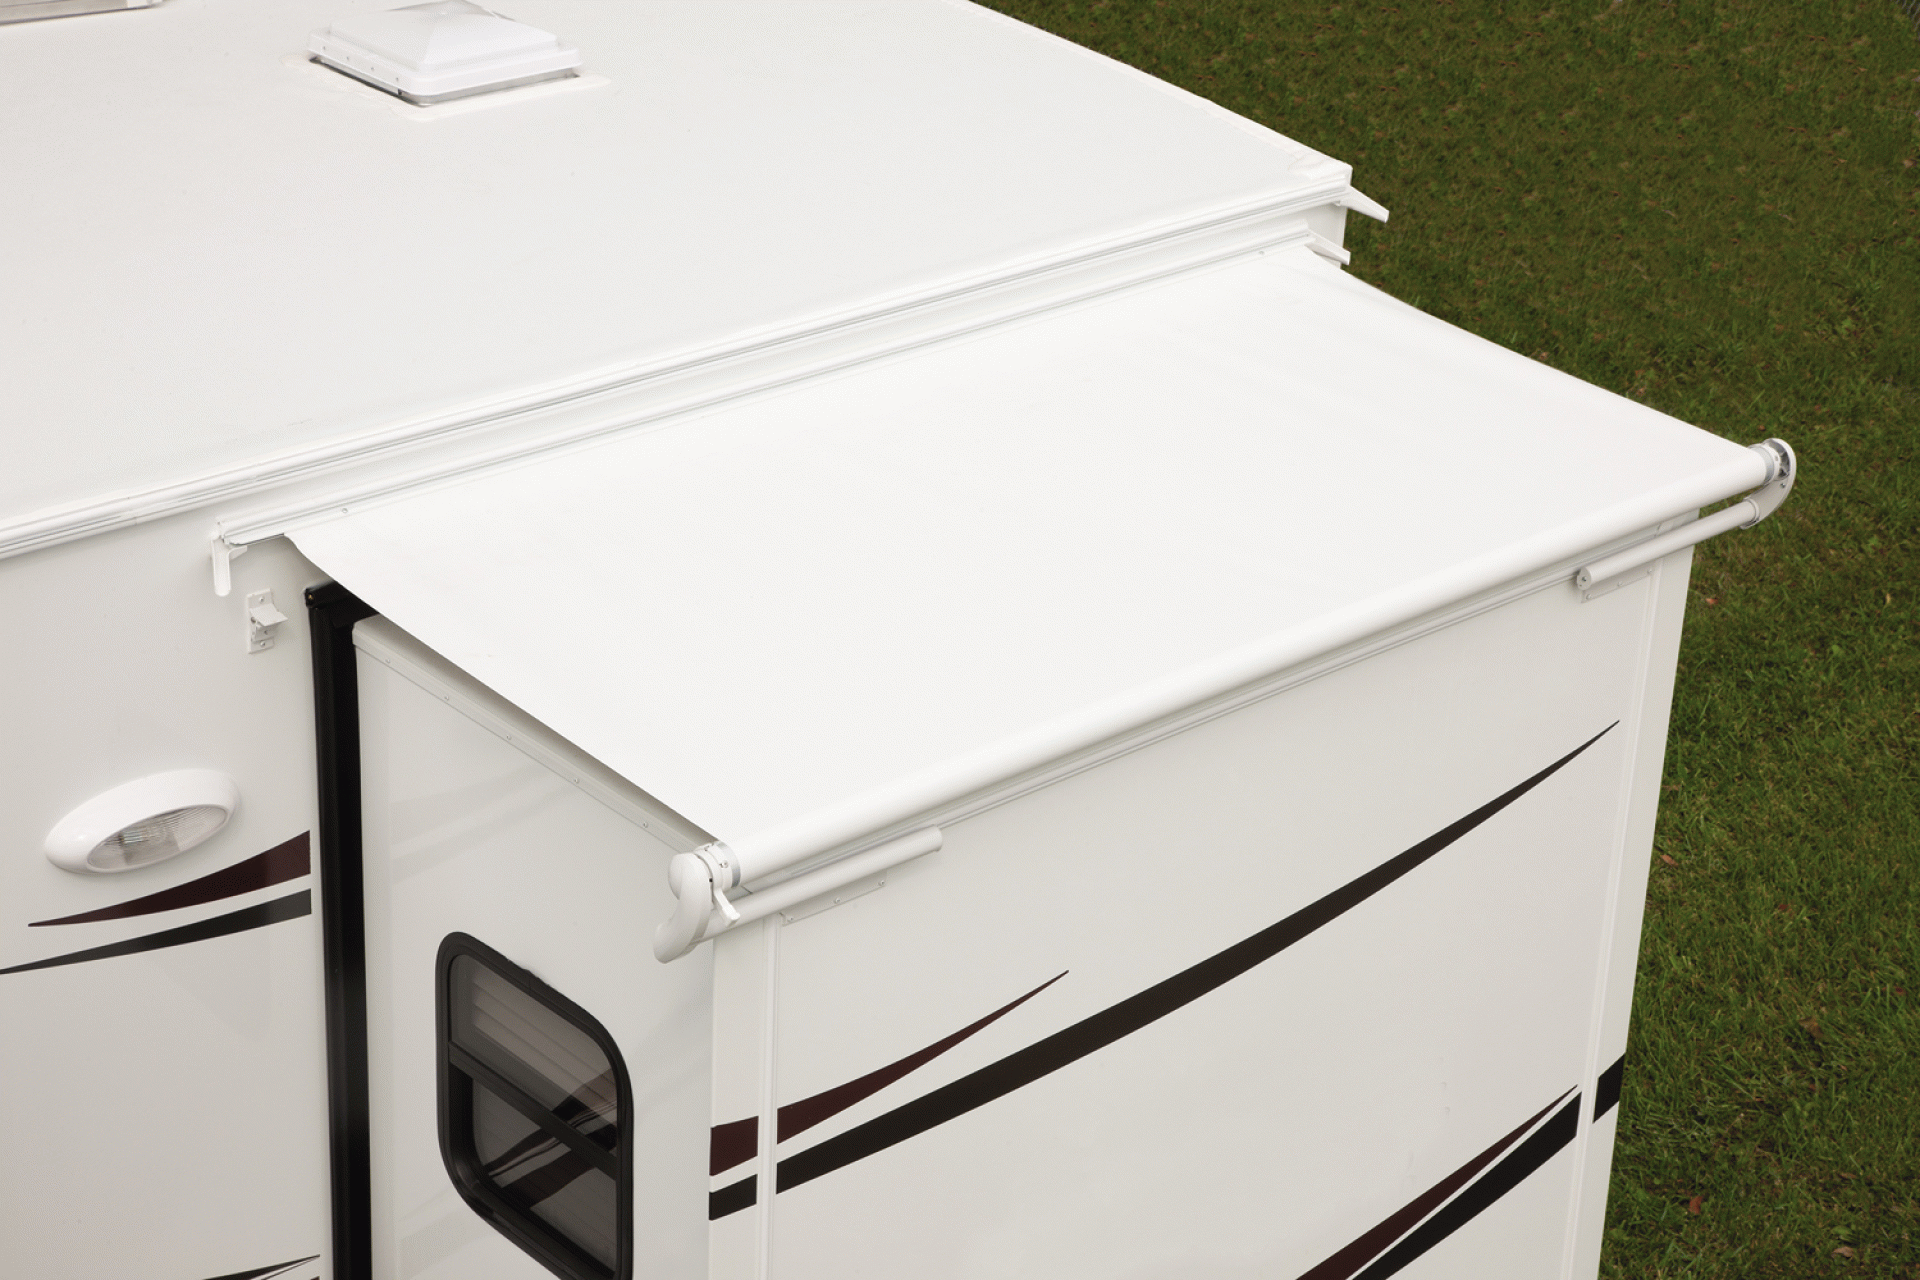 DOMETIC | 98001CQ.084B | DELUXE SLIDE TOPPER 84" FITS ROOM WIDTH 74"-79 3/4" 74WHITE VINYL WHITE WEATHERSHIELD